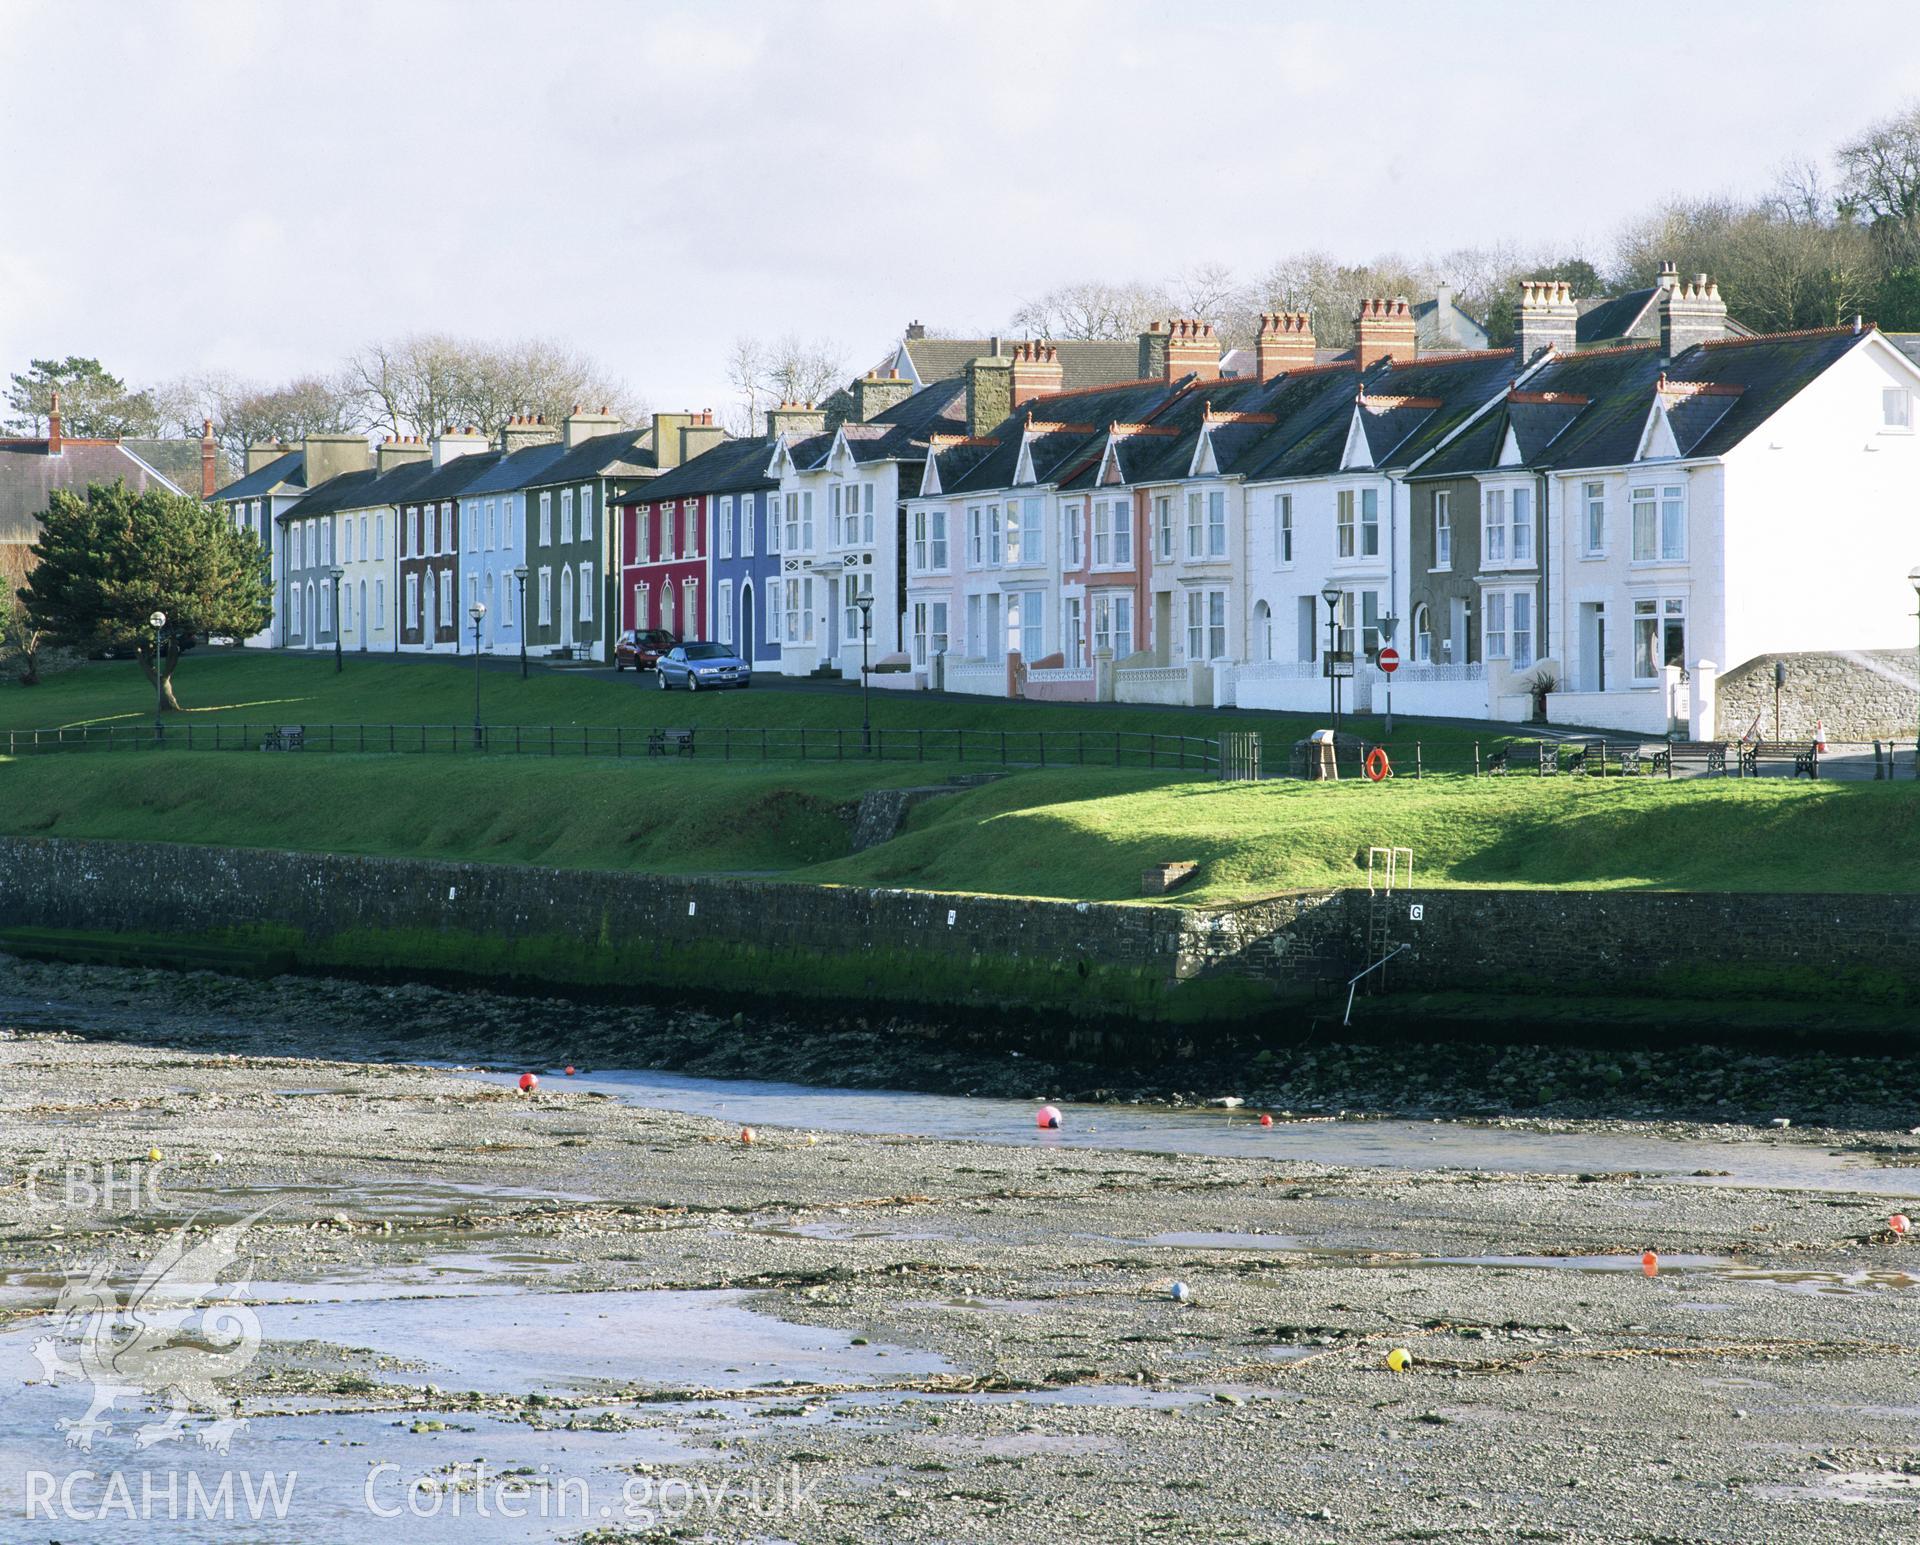 Colour transparency showing Belle Vue Terrace, Aberaeron, produced by Iain Wright, June 2004